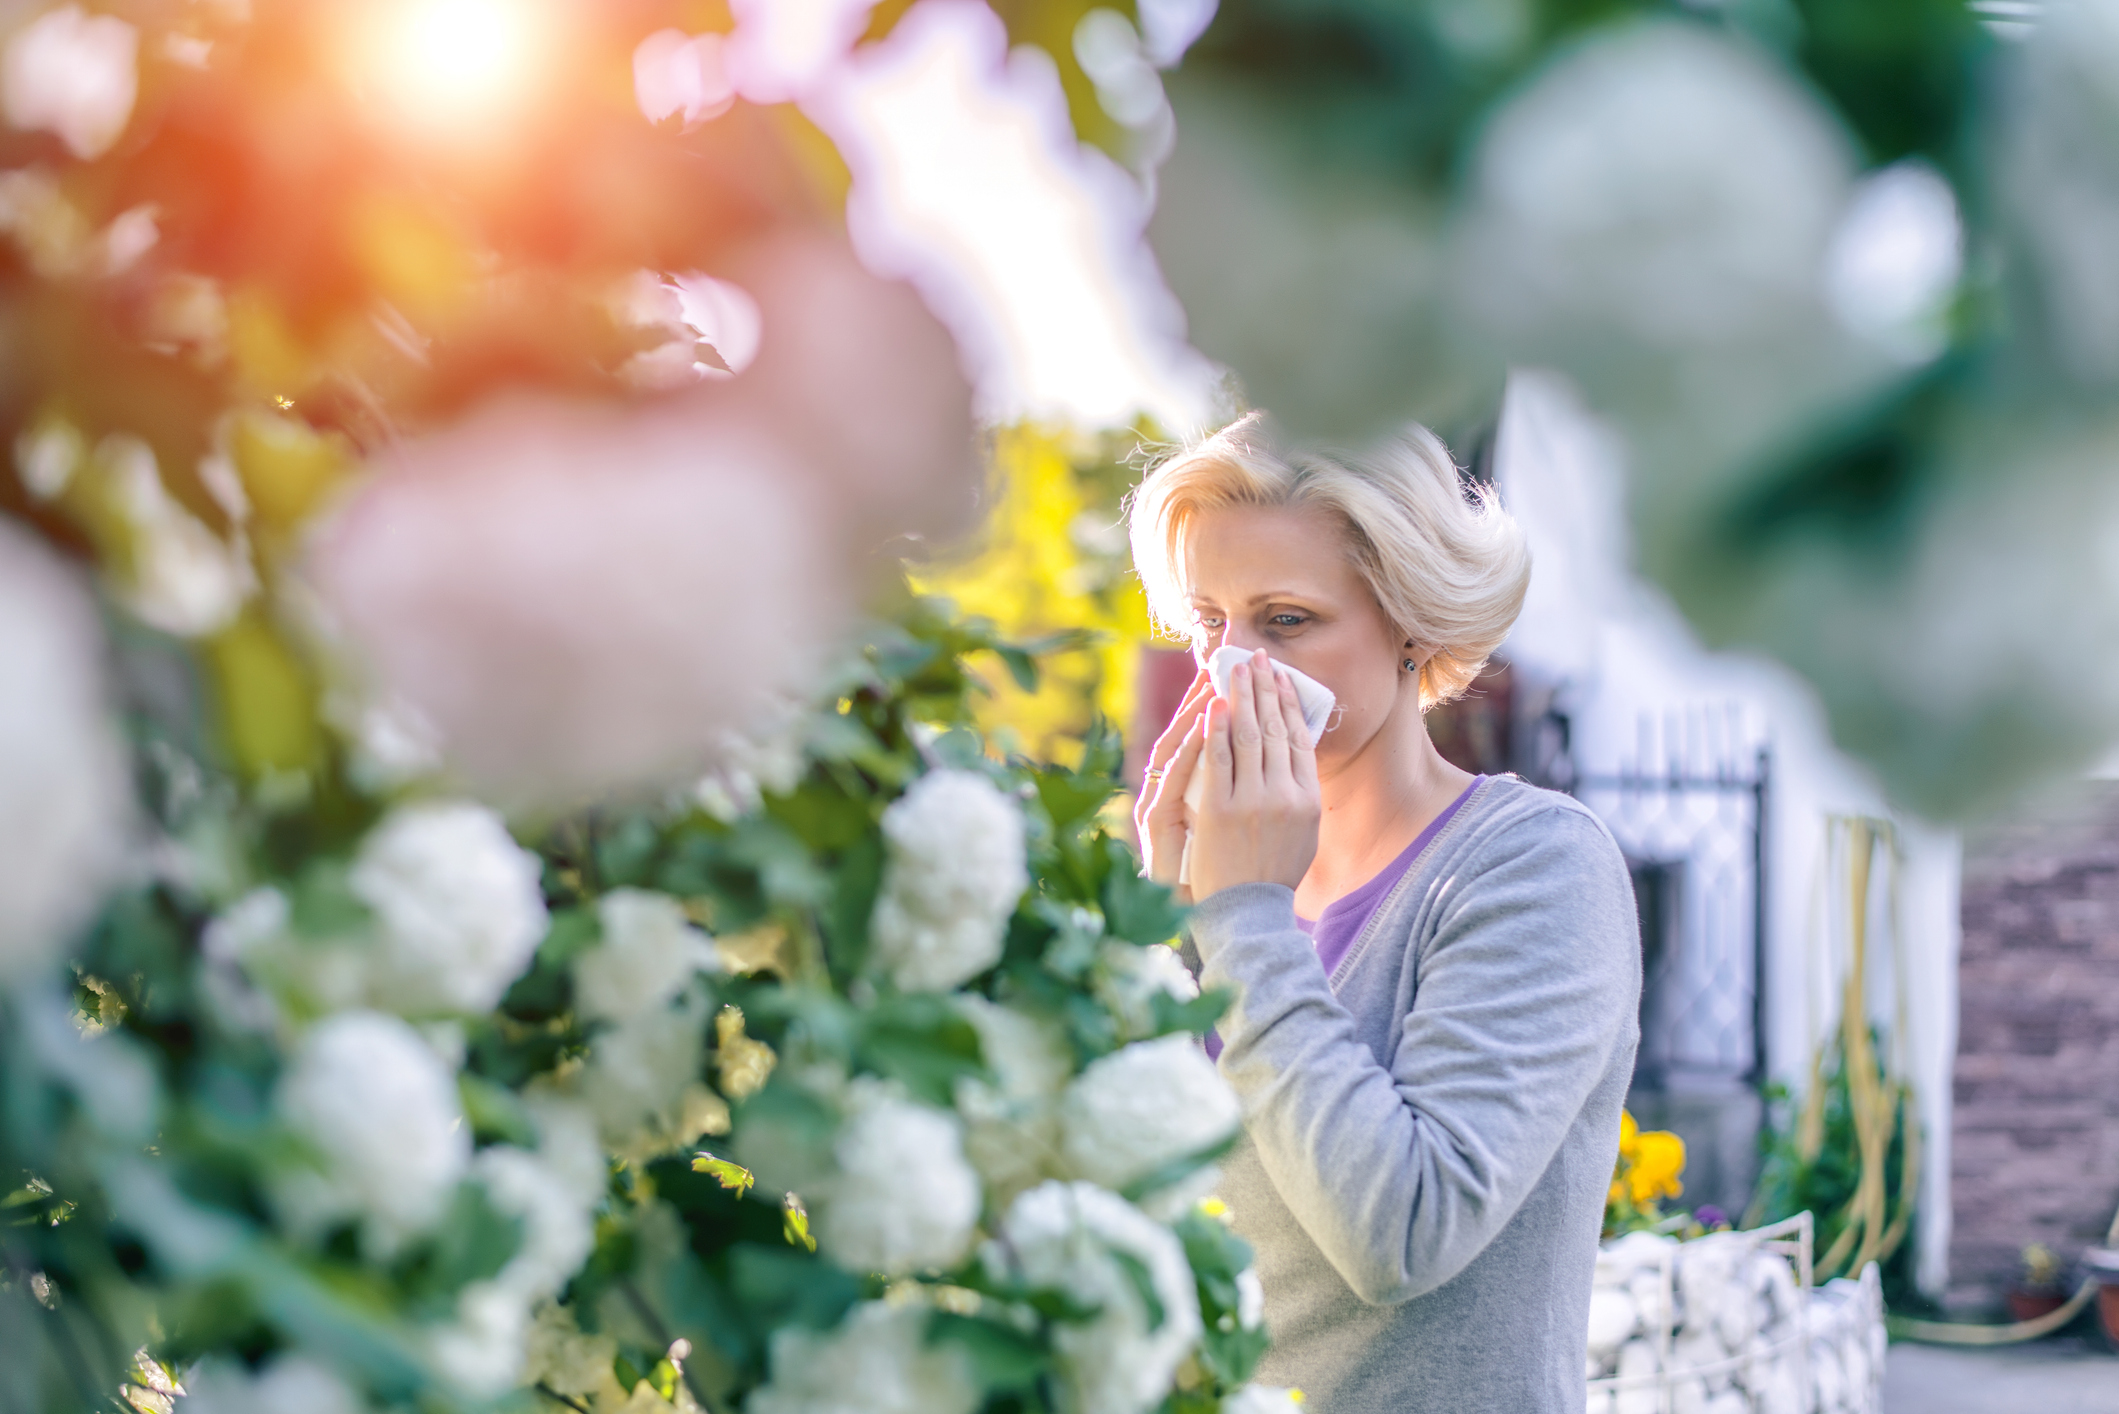 Help for hay fever from an unlikely place